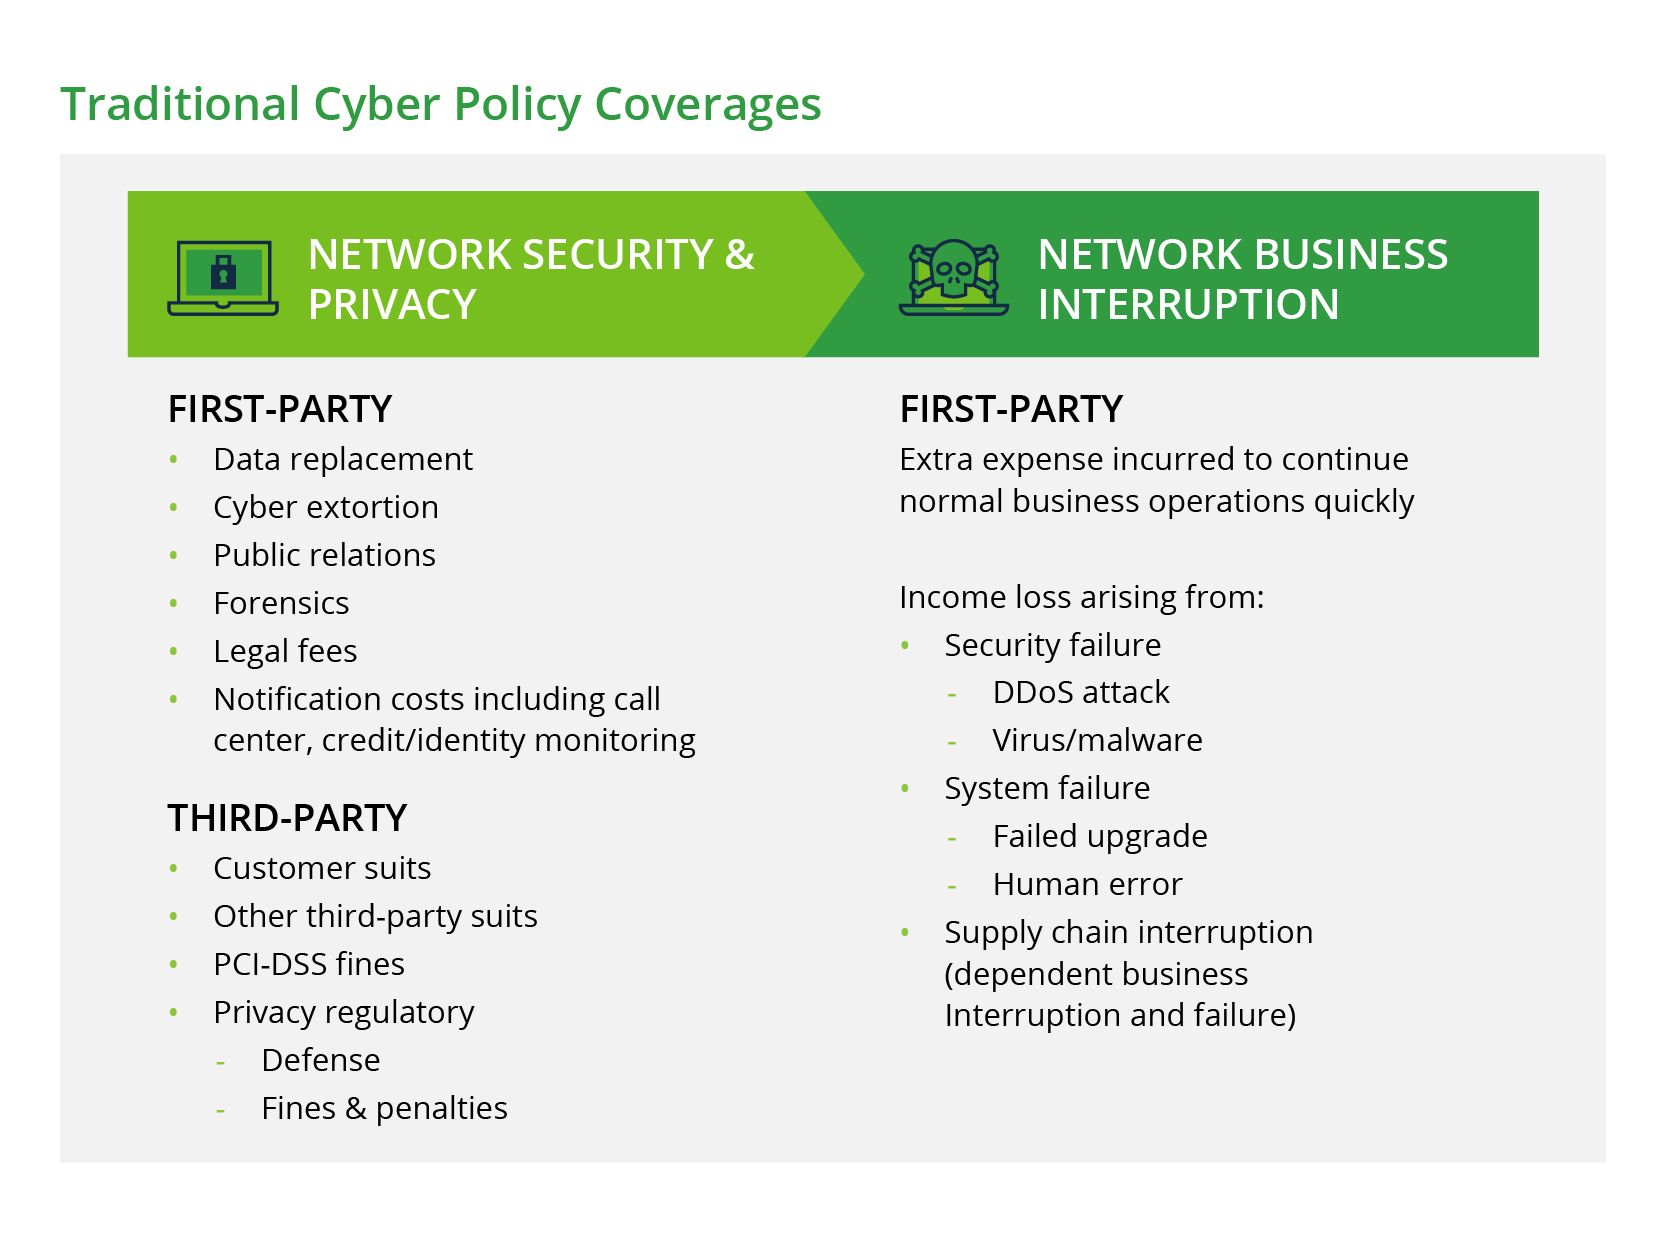 Traditional Cyber Policy Coverages: Network Security & Privacy, Network Business Interruption